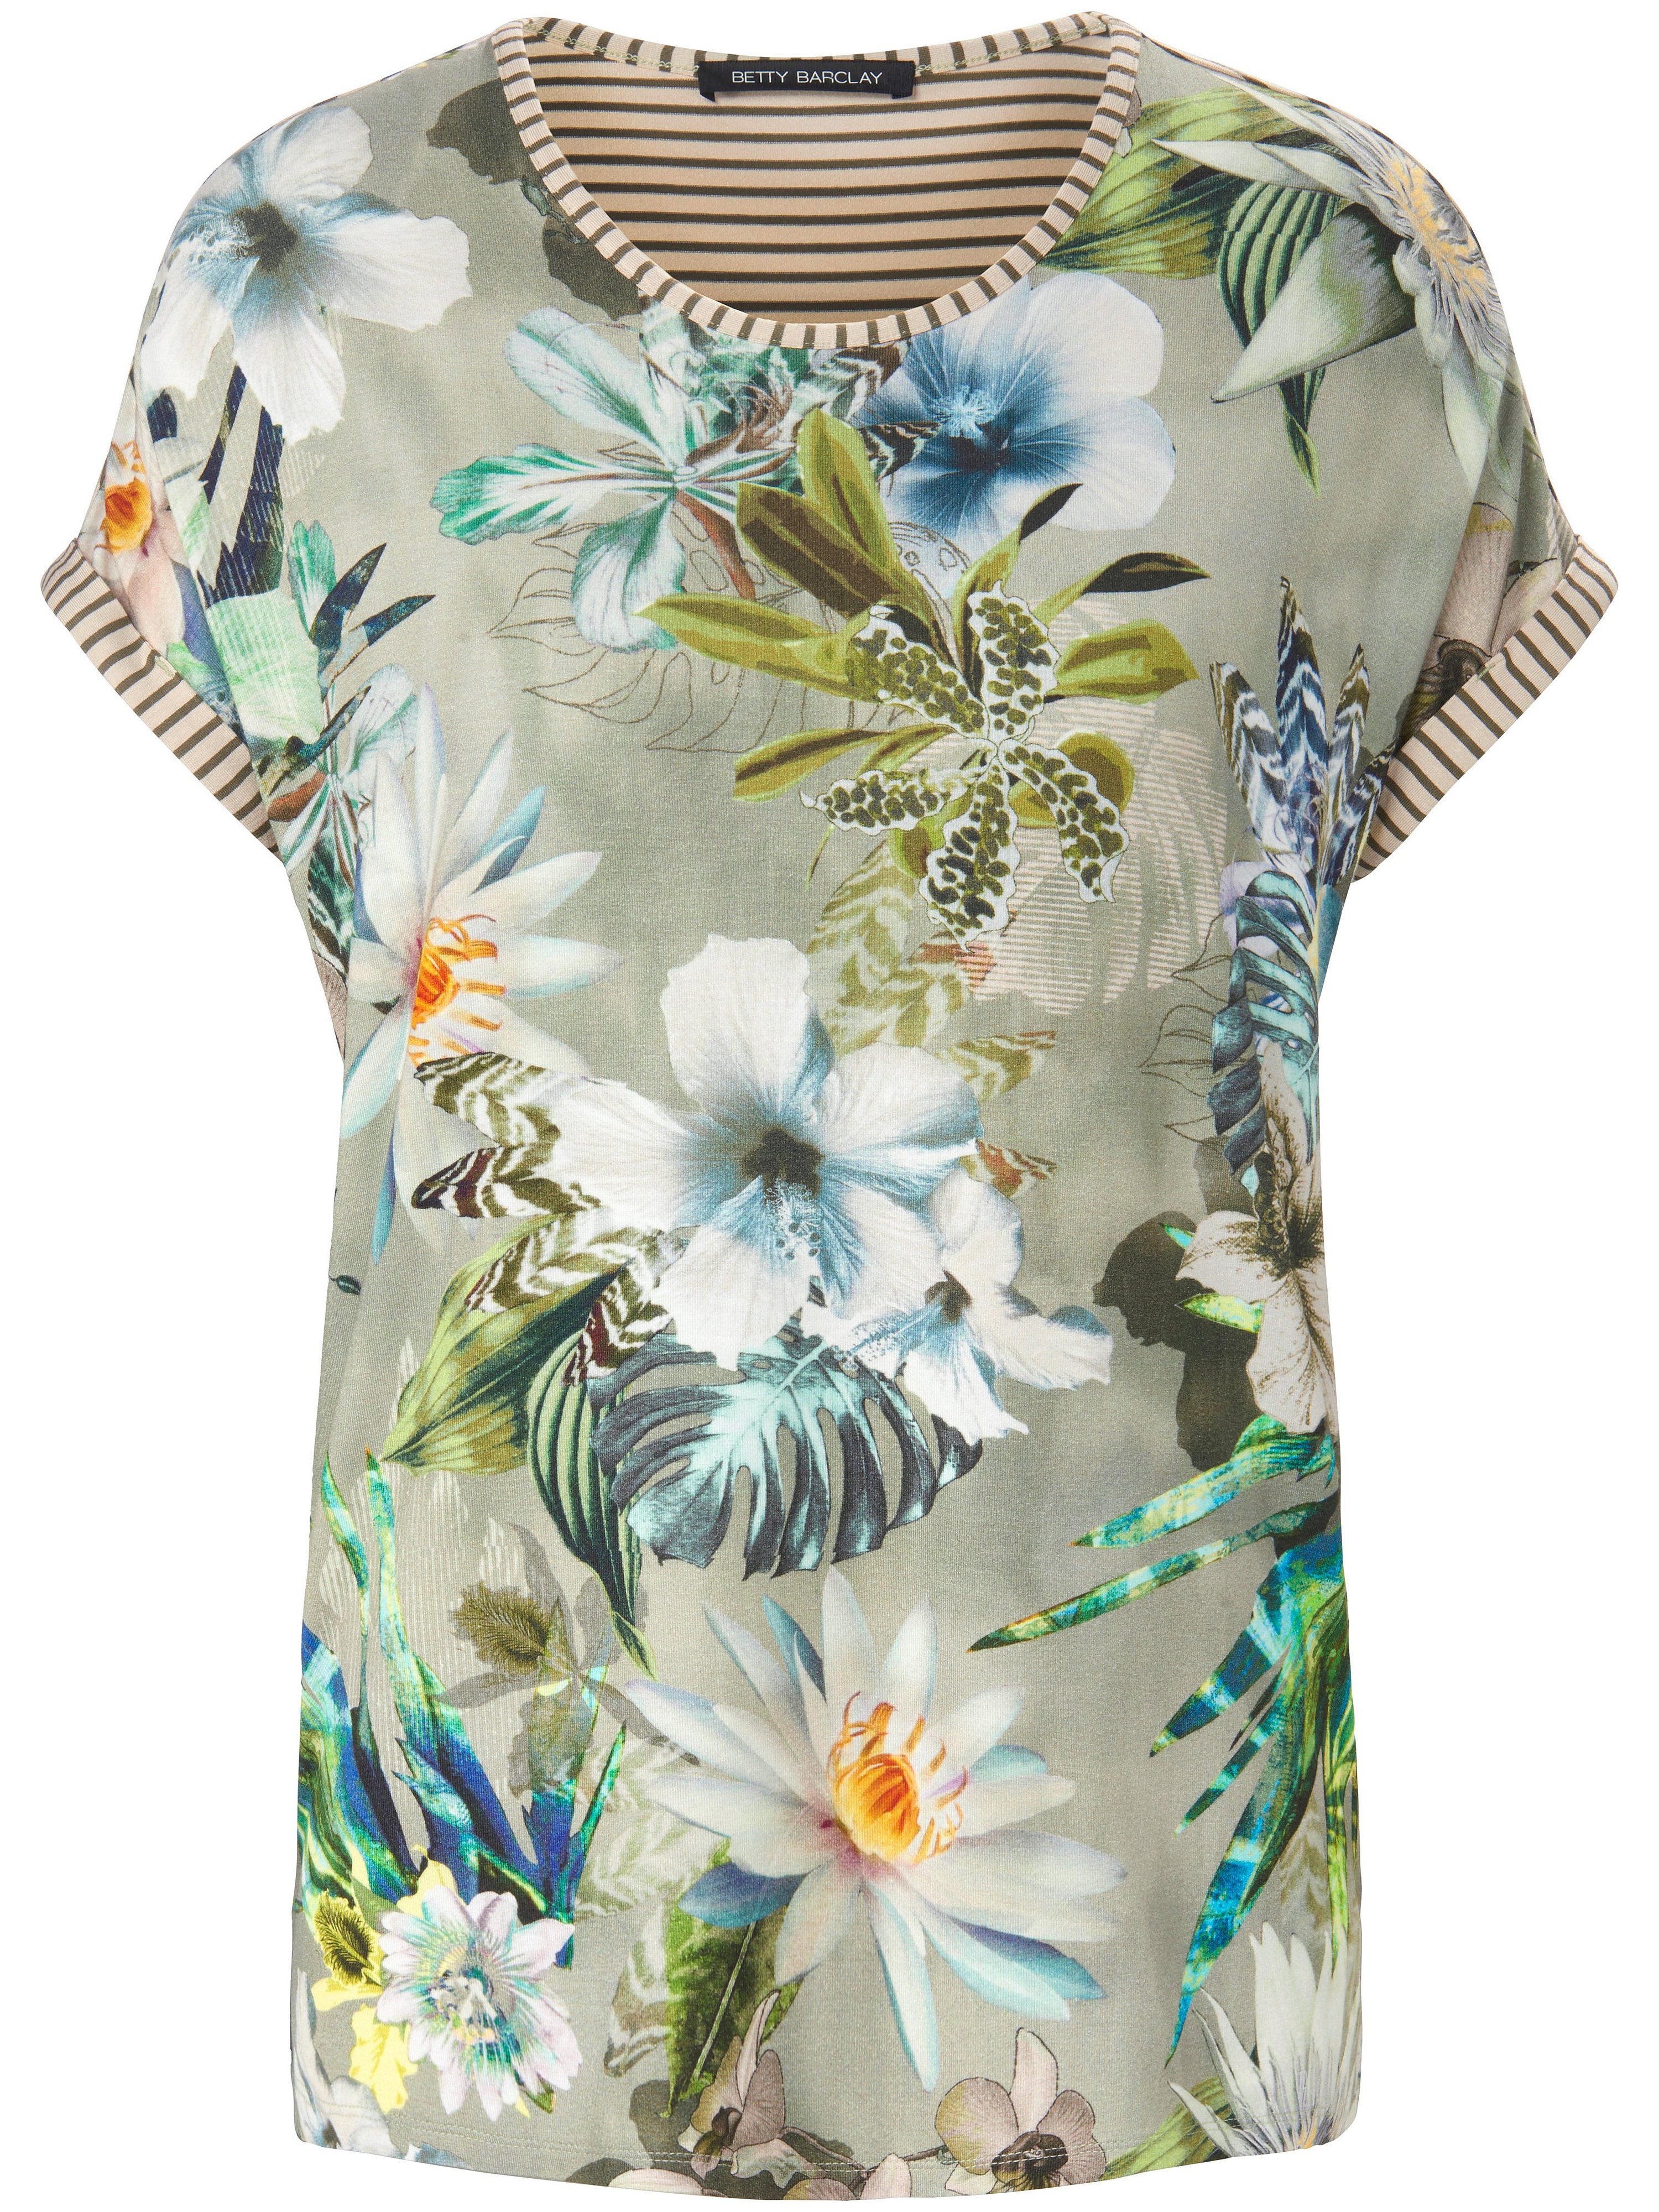 Round-neck top short sleeves Betty Barclay green